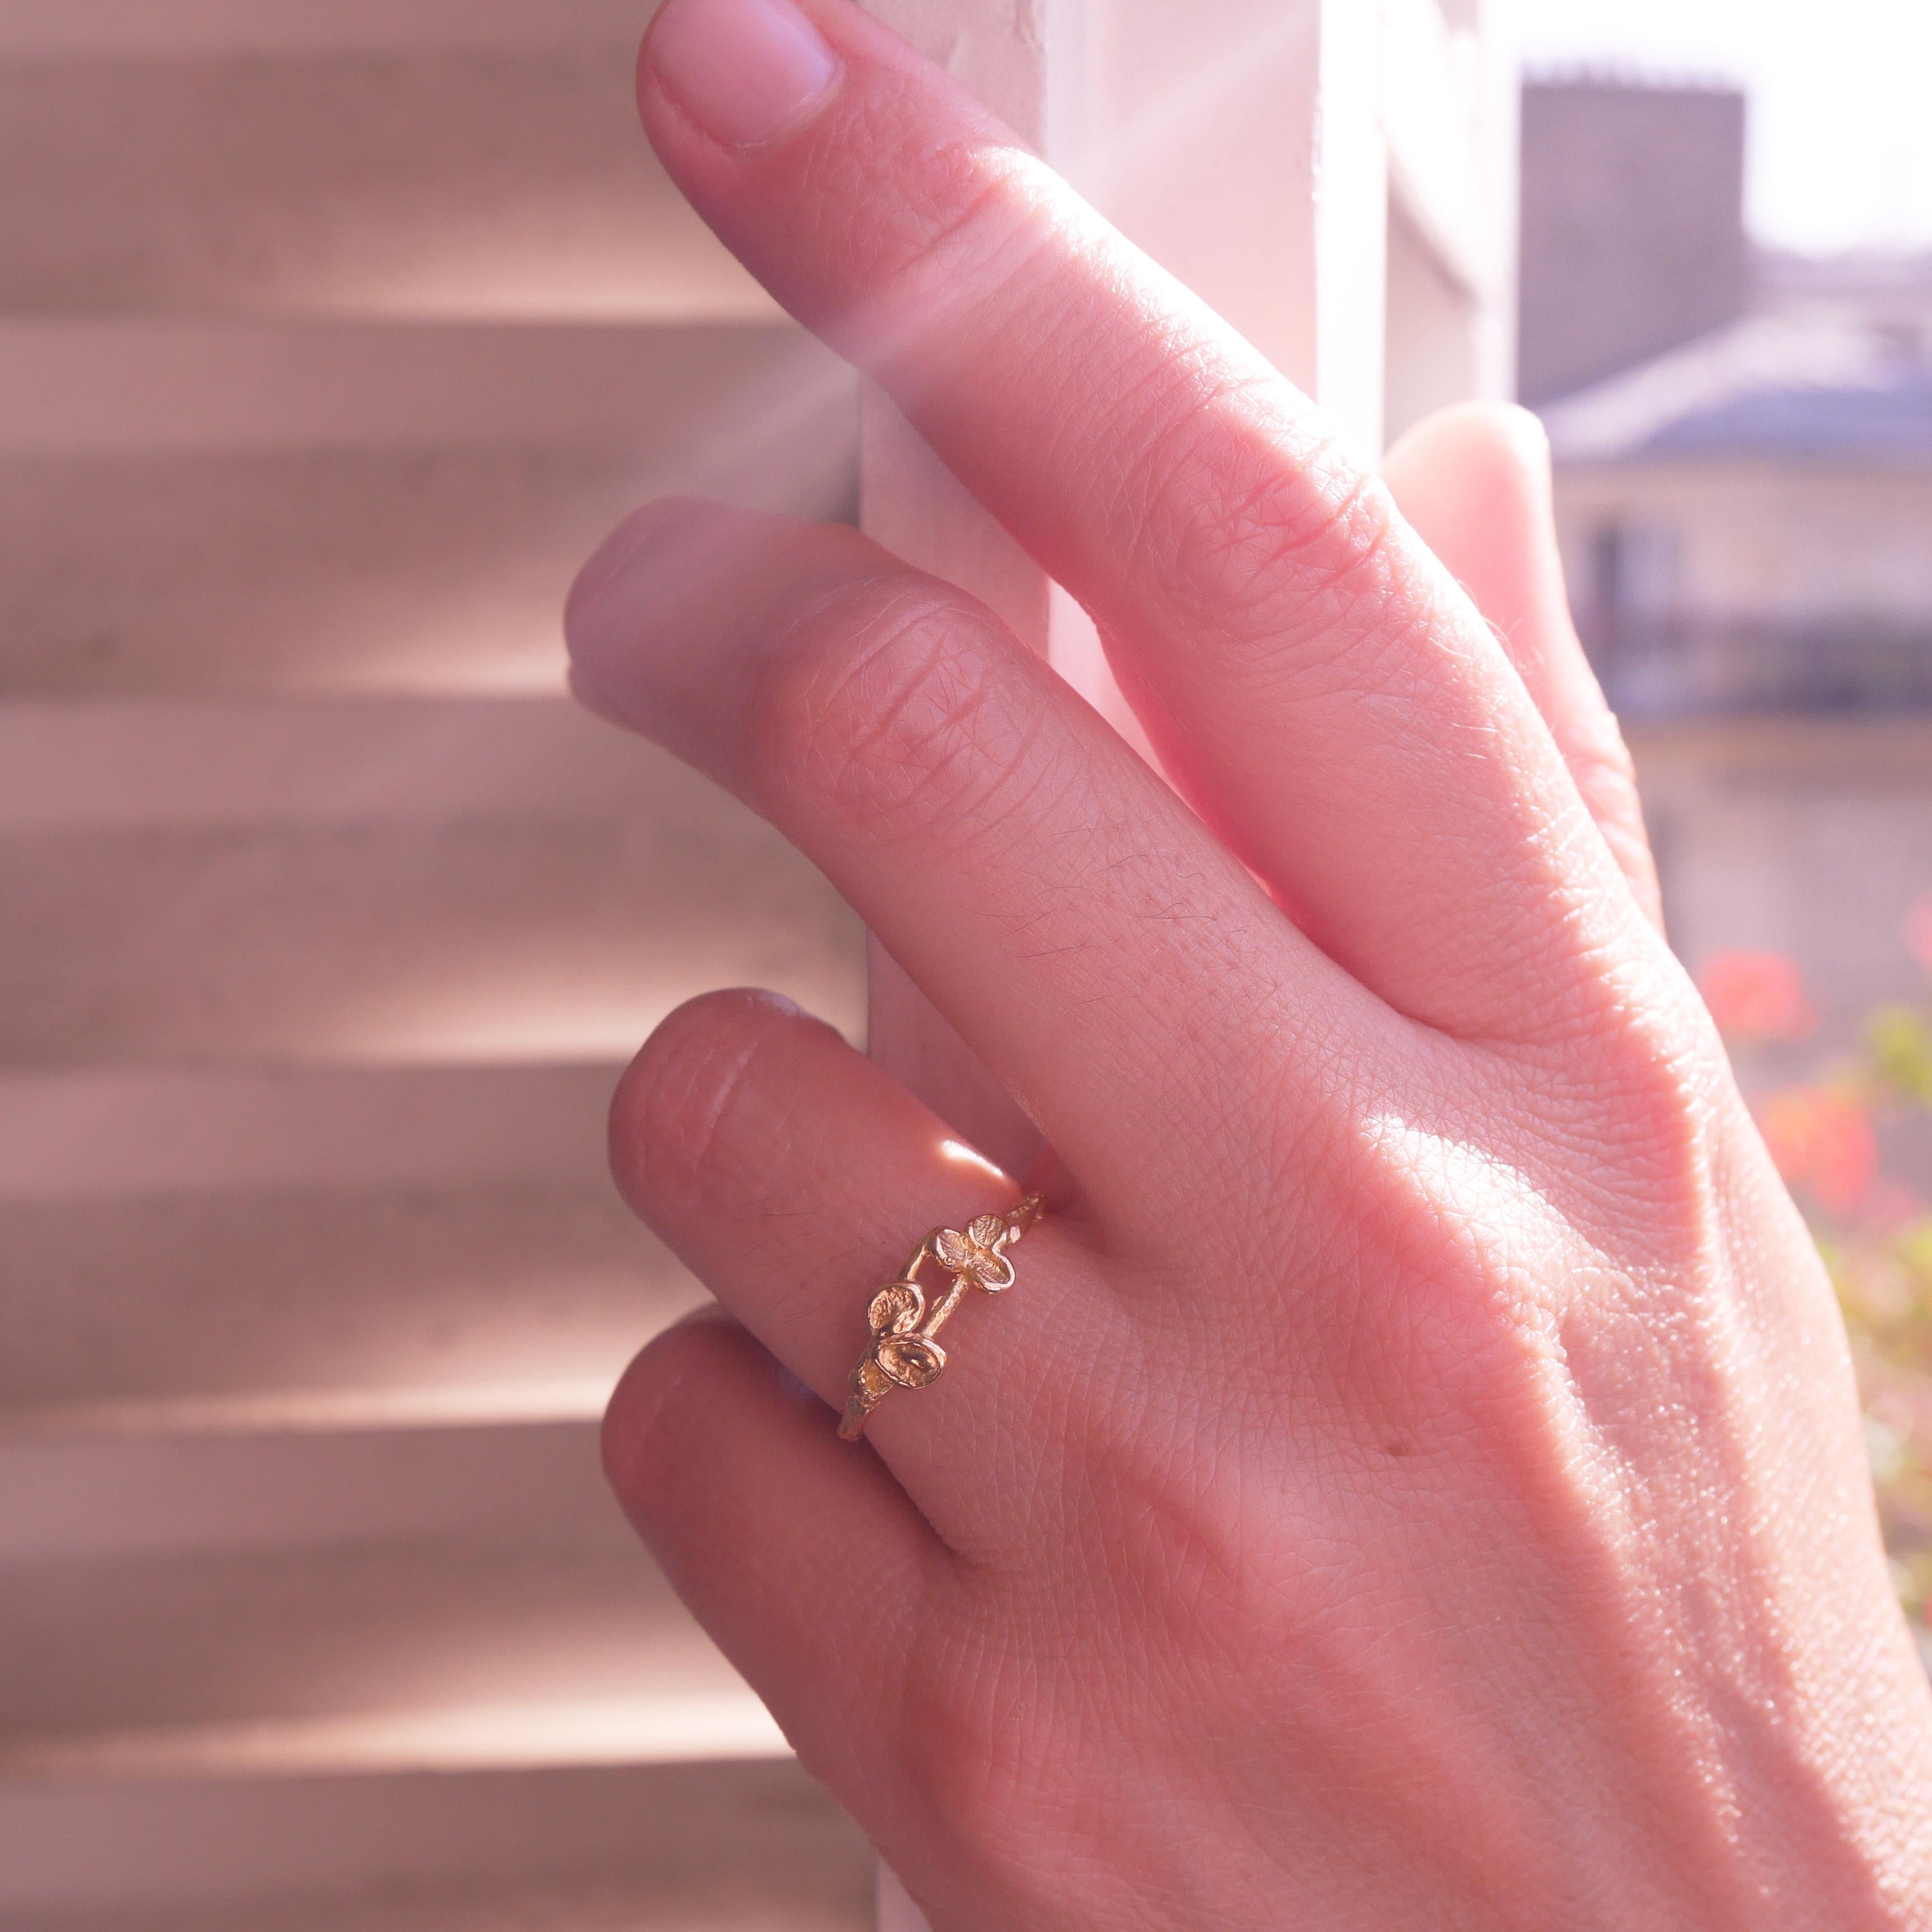 One of a kind]ring is made in 18 Karat yellow gold app. 2,5 grams.
It's reversible with a delicate leaf.
French size 52  / 5.5 US size .
It can be made to size upon request.
The craftsmanship is entirely hand made with great care, in my Parisian